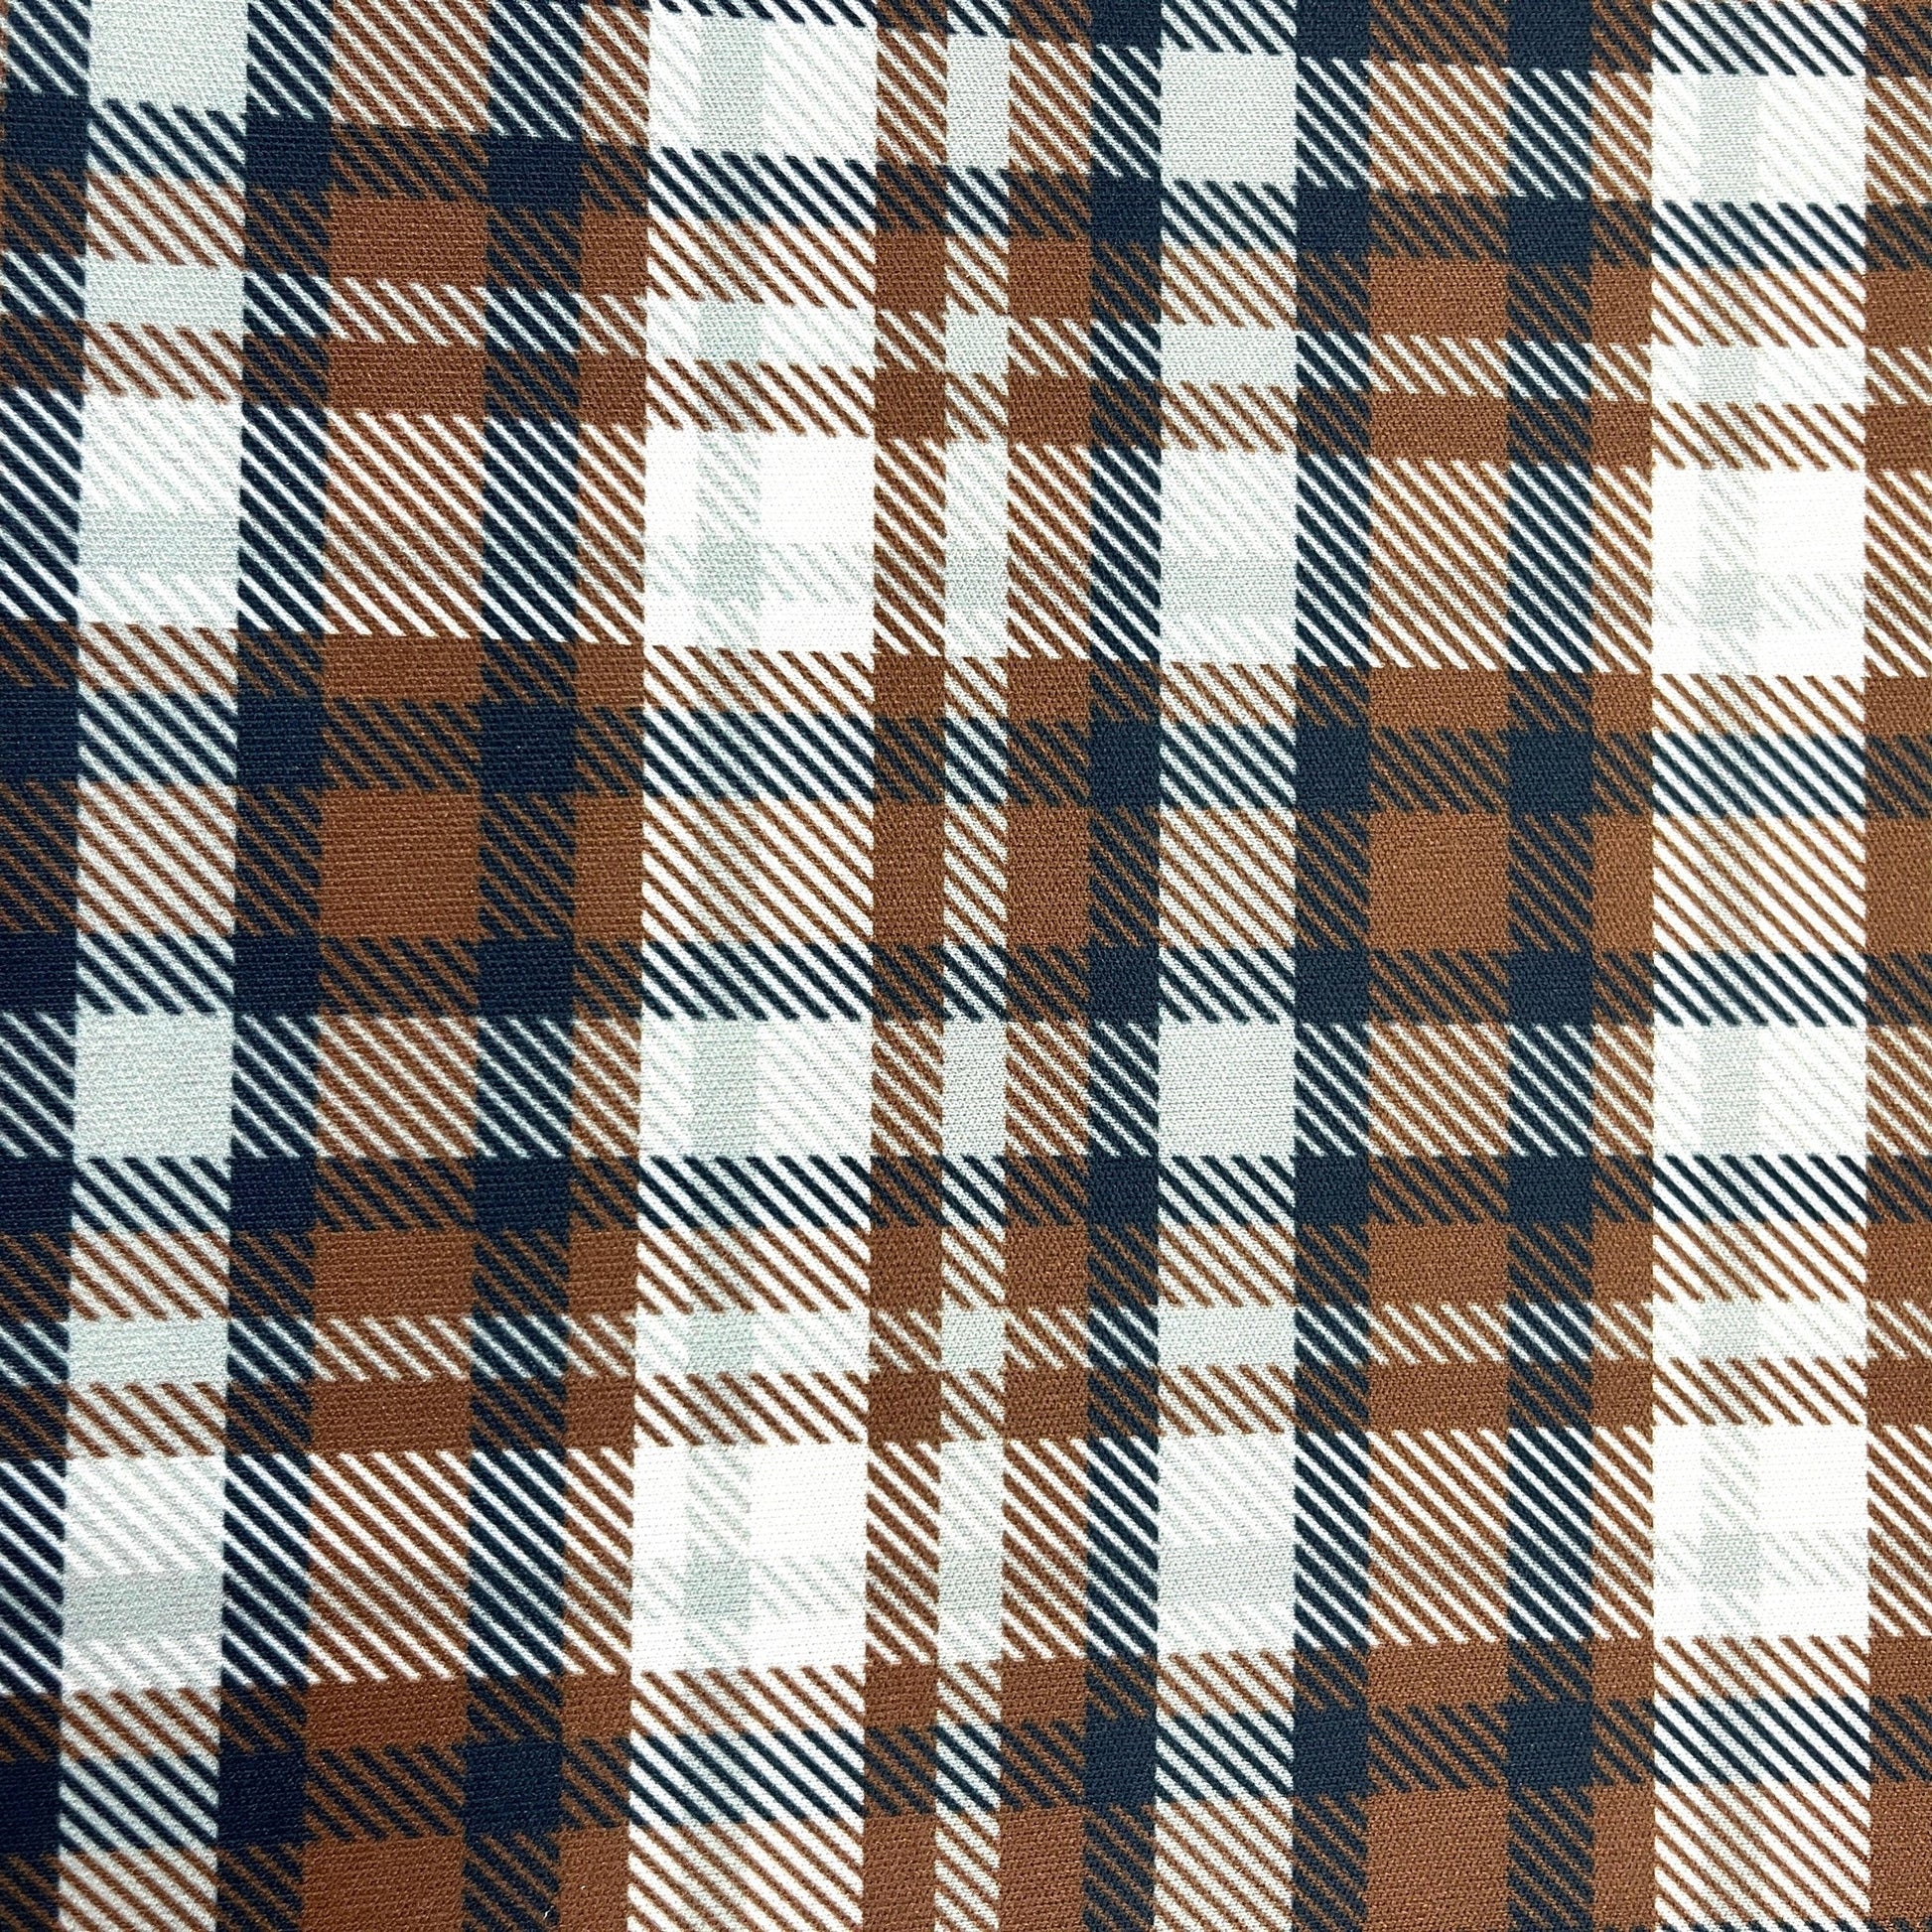 Rust Plaid 1 mil PUL Fabric - Made in the USA - Nature's Fabrics